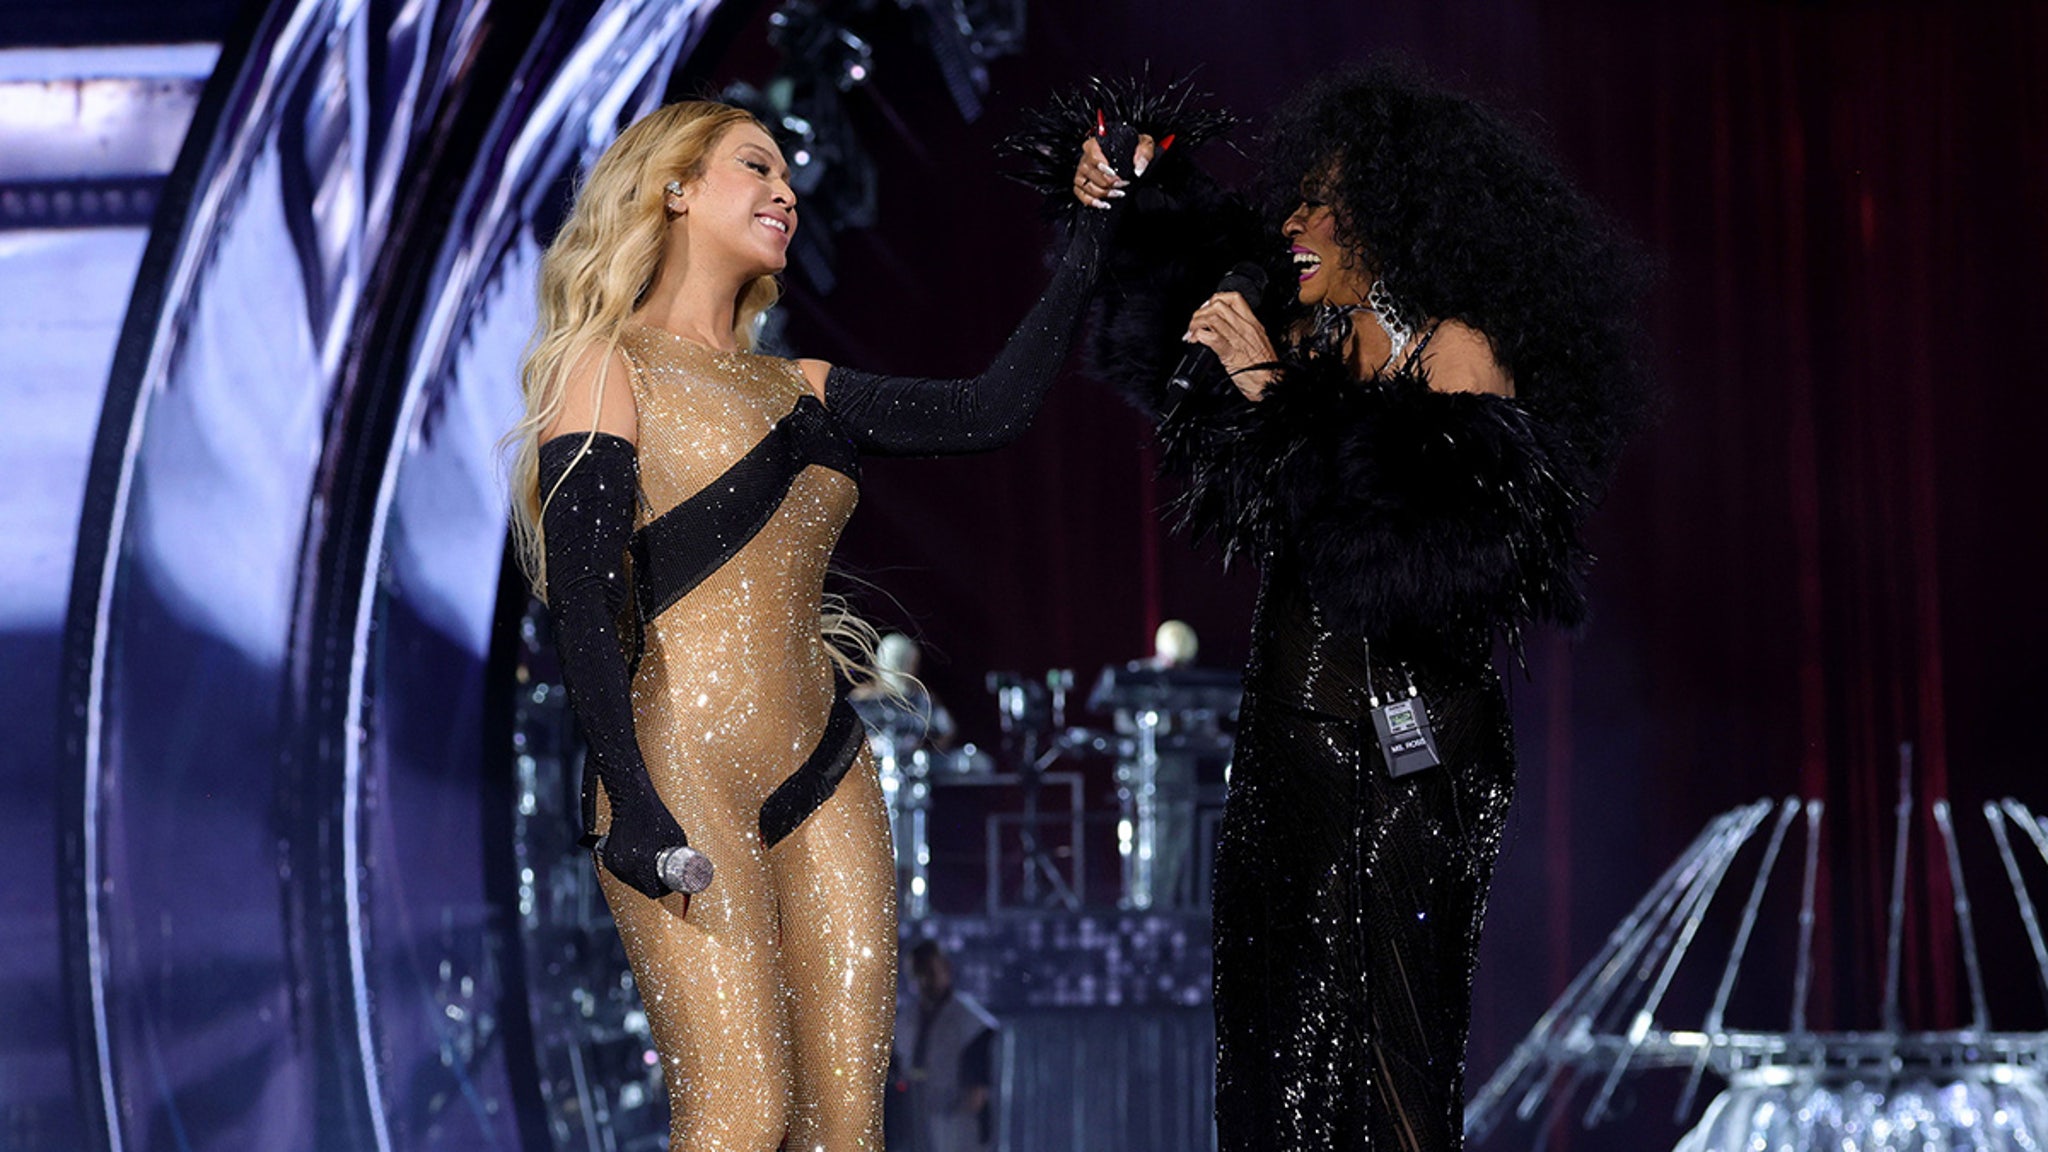 Beyoncé's Birthday Concert in L.A. Packed with Celebs, Diana Ross Surprise